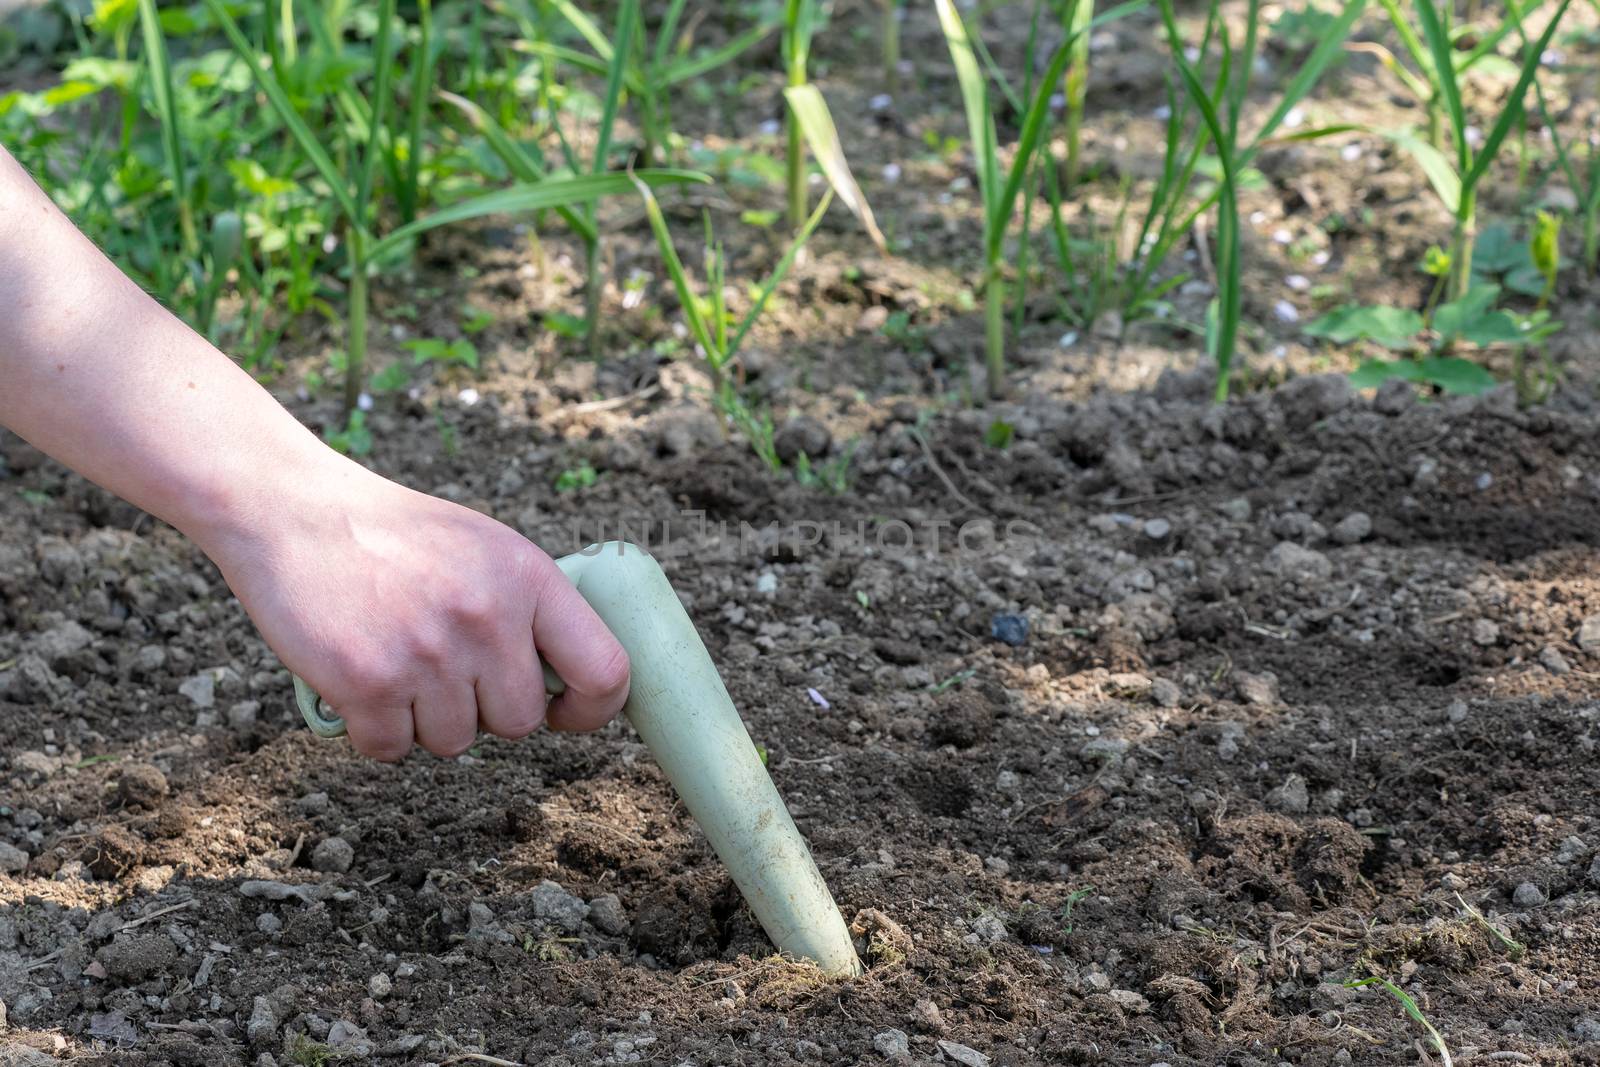 Hand works the soil with garden tool. Small gardening work tool in the vegetable garden. Spring gardening.